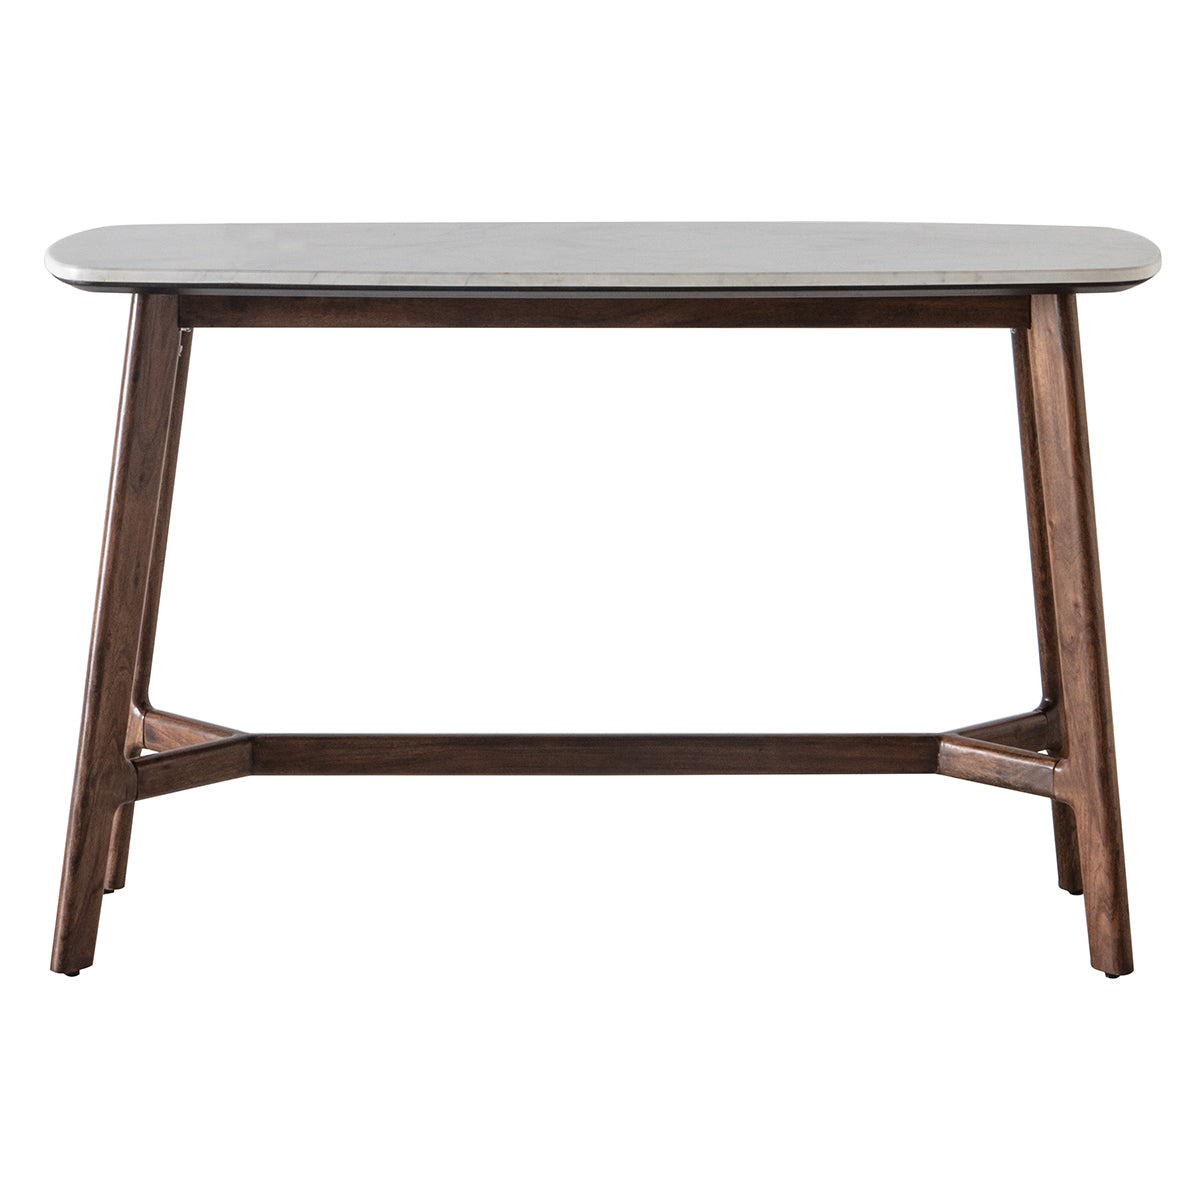 An Avonwick Console Table with a marble top and wooden legs, perfect for interior decor and home furniture.